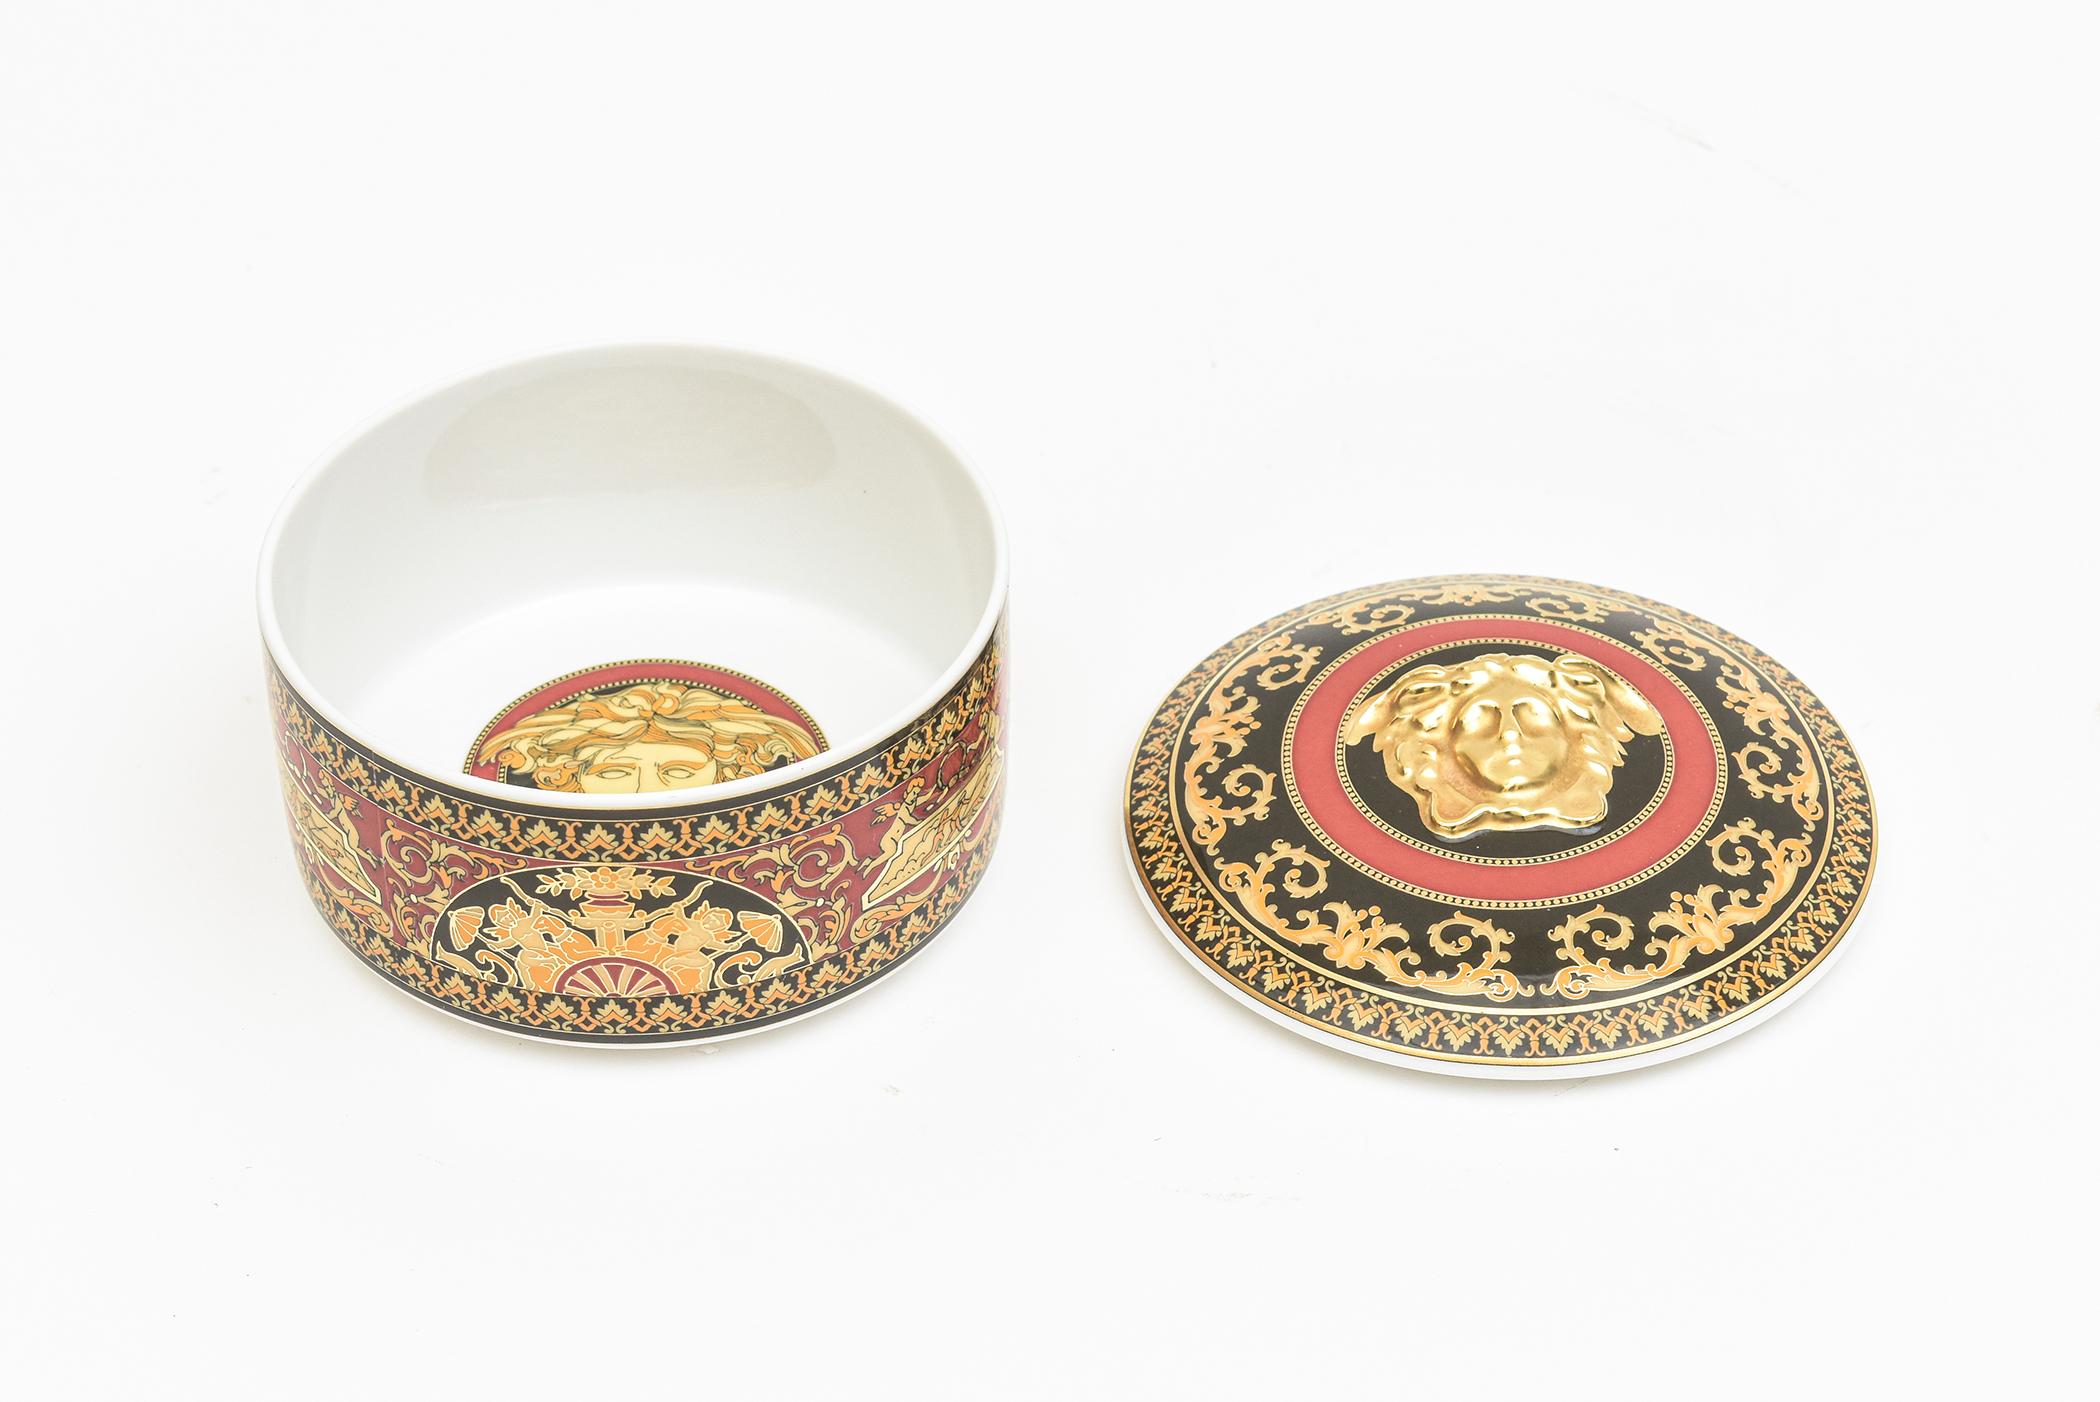 Rosenthal Germany Versace Porcelain Black, Red, White, Gold Medusa 2 Part Box In Good Condition For Sale In North Miami, FL